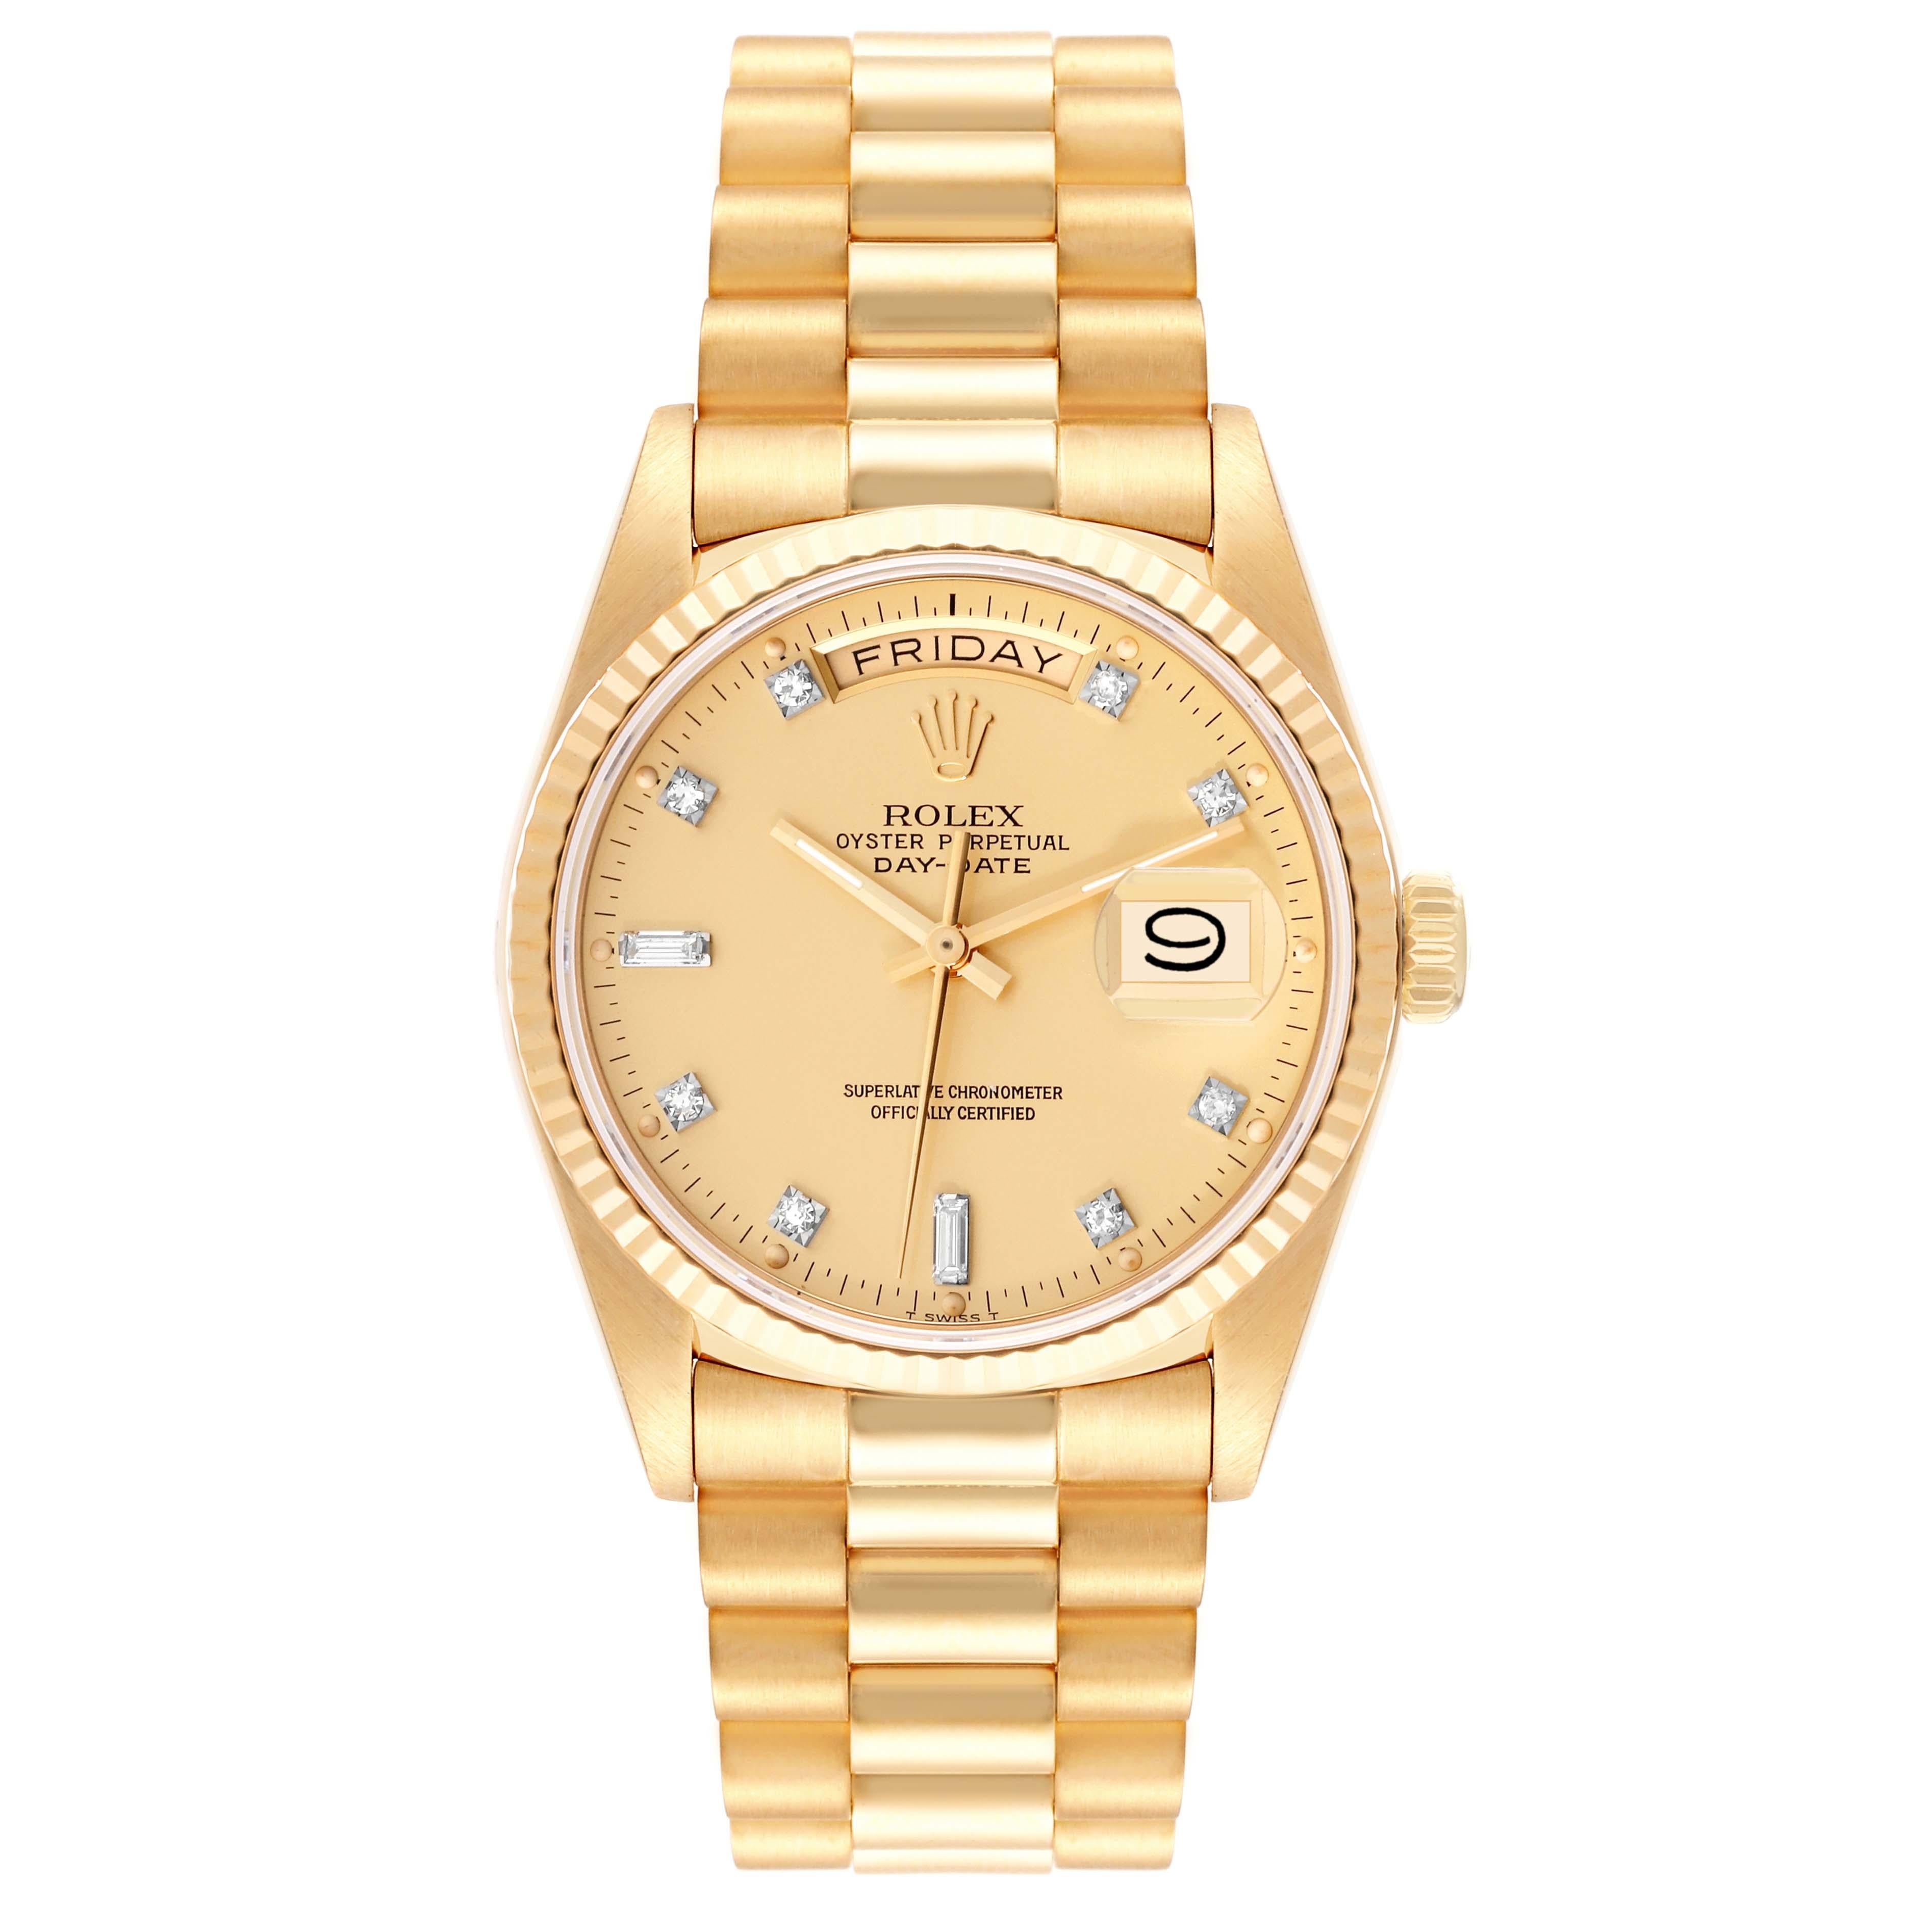 Rolex President Day-Date Yellow Gold Diamond Dial Mens Watch 18038. Officially certified chronometer automatic self-winding movement. 18k yellow gold oyster case 36 mm in diameter. Rolex logo on a crown. 18K yellow gold fluted bezel. Scratch